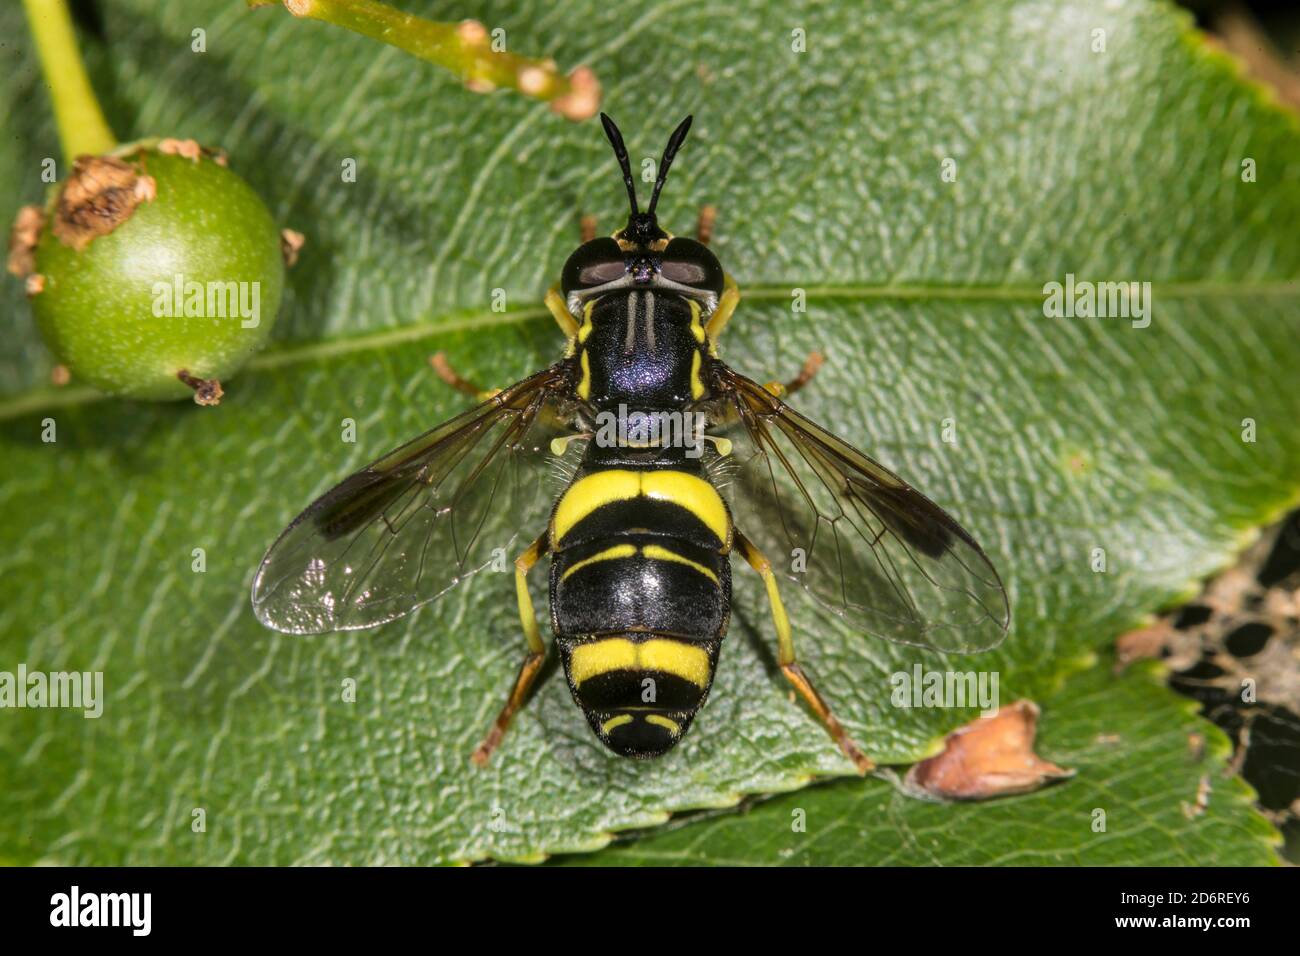 hoverfly, flower fly, syrphid fly (Chrysotoxum bicinctum), sitting on a leaf, view from above, Germany Stock Photo